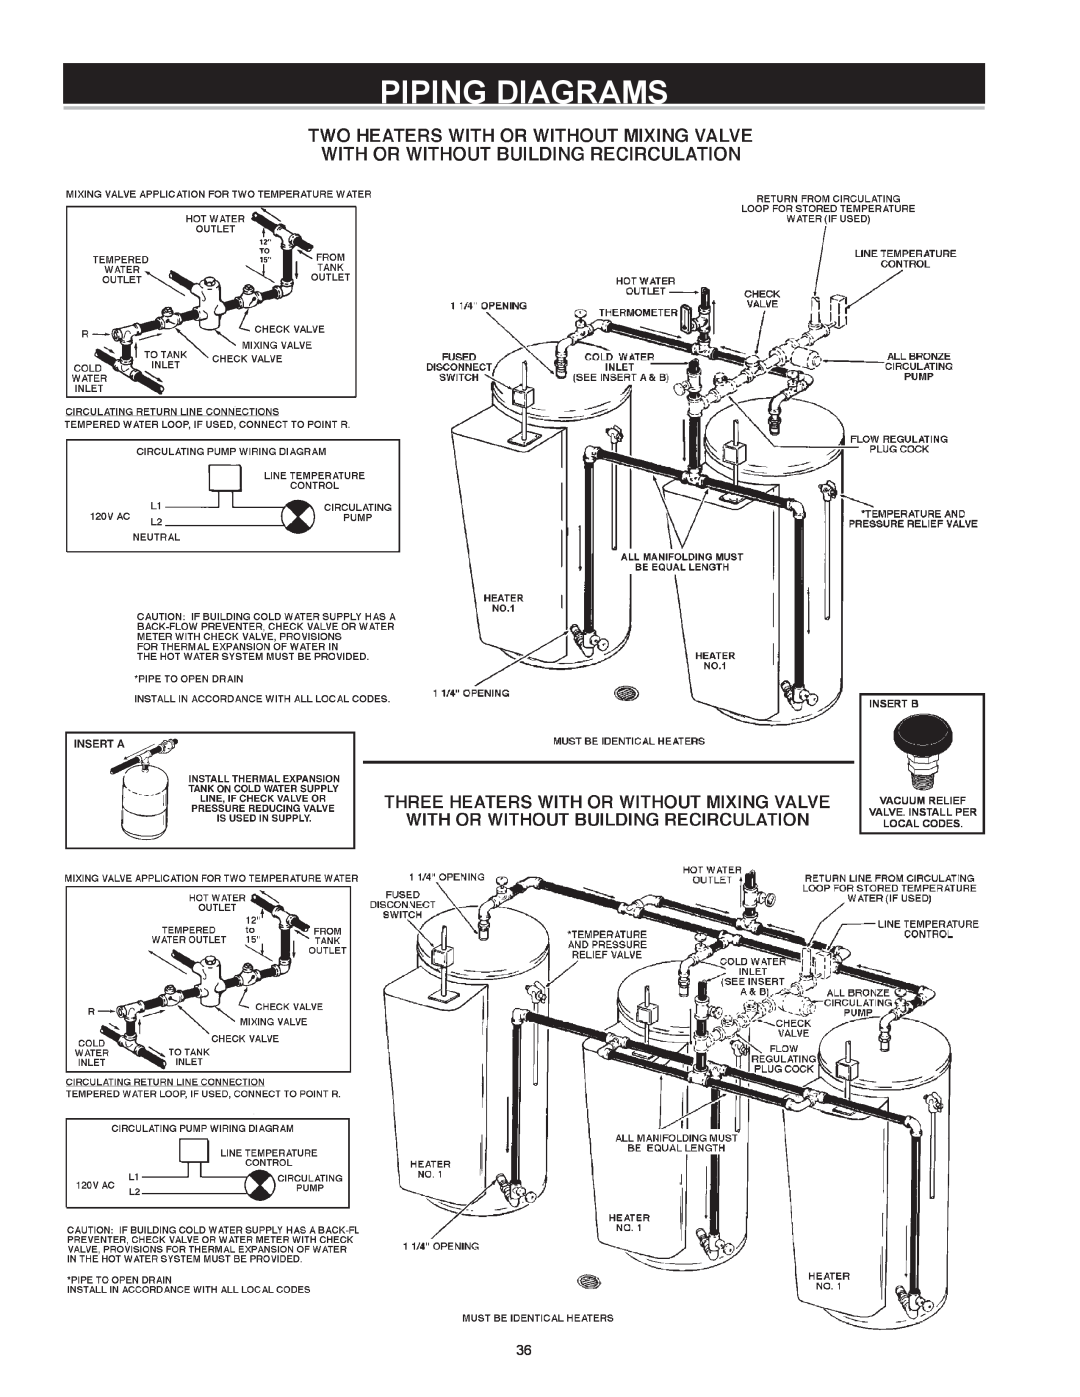 A.O. Smith Dve-52/80/120 instruction manual Piping Diagrams, Insert B Vacuum Relief Valve. Install Per Local Codes 